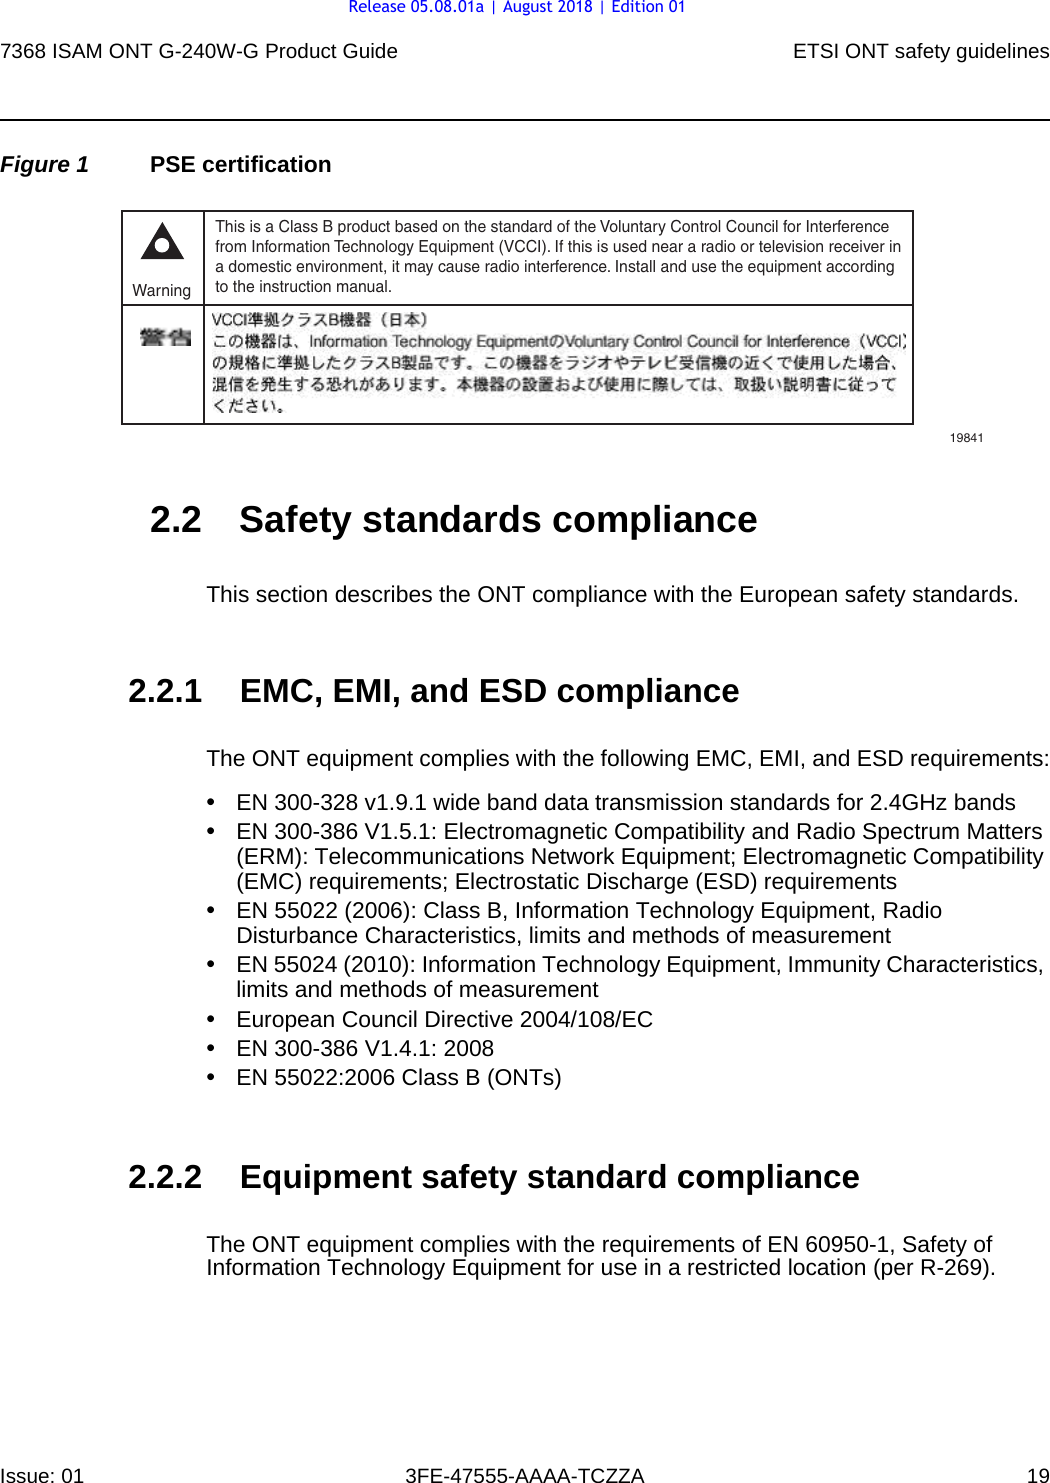 7368 ISAM ONT G-240W-G Product Guide ETSI ONT safety guidelinesIssue: 01 3FE-47555-AAAA-TCZZA 19 Figure 1 PSE certification2.2 Safety standards complianceThis section describes the ONT compliance with the European safety standards.2.2.1 EMC, EMI, and ESD complianceThe ONT equipment complies with the following EMC, EMI, and ESD requirements:•EN 300-328 v1.9.1 wide band data transmission standards for 2.4GHz bands•EN 300-386 V1.5.1: Electromagnetic Compatibility and Radio Spectrum Matters (ERM): Telecommunications Network Equipment; Electromagnetic Compatibility (EMC) requirements; Electrostatic Discharge (ESD) requirements•EN 55022 (2006): Class B, Information Technology Equipment, Radio Disturbance Characteristics, limits and methods of measurement•EN 55024 (2010): Information Technology Equipment, Immunity Characteristics, limits and methods of measurement•European Council Directive 2004/108/EC•EN 300-386 V1.4.1: 2008•EN 55022:2006 Class B (ONTs)2.2.2 Equipment safety standard complianceThe ONT equipment complies with the requirements of EN 60950-1, Safety of Information Technology Equipment for use in a restricted location (per R-269).This is a Class B product based on the standard of the Voluntary Control Council for Interferencefrom Information Technology Equipment (VCCI). If this is used near a radio or television receiver ina domestic environment, it may cause radio interference. Install and use the equipment accordingto the instruction manual. Warning19841Release 05.08.01a | August 2018 | Edition 01